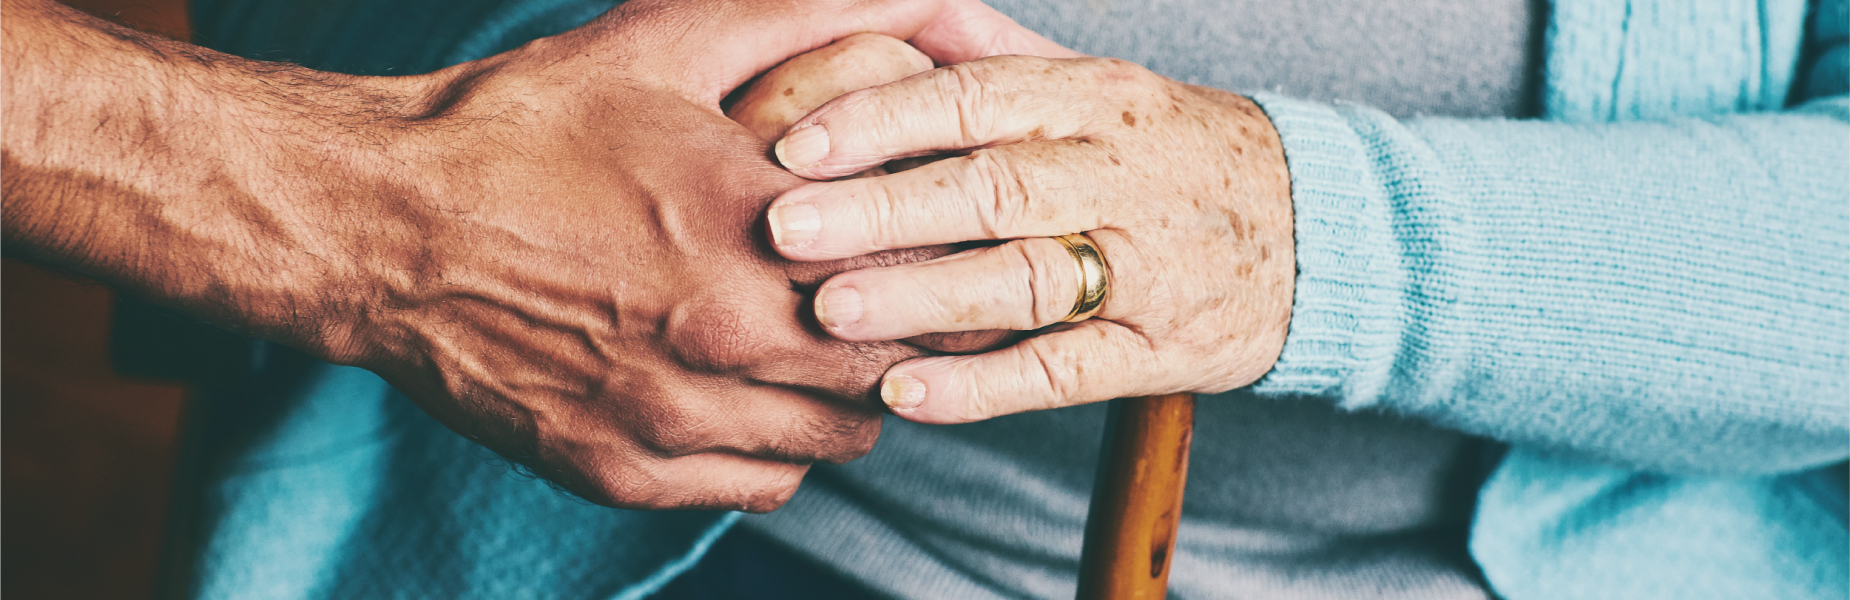 Elderly person holding a carers hand.